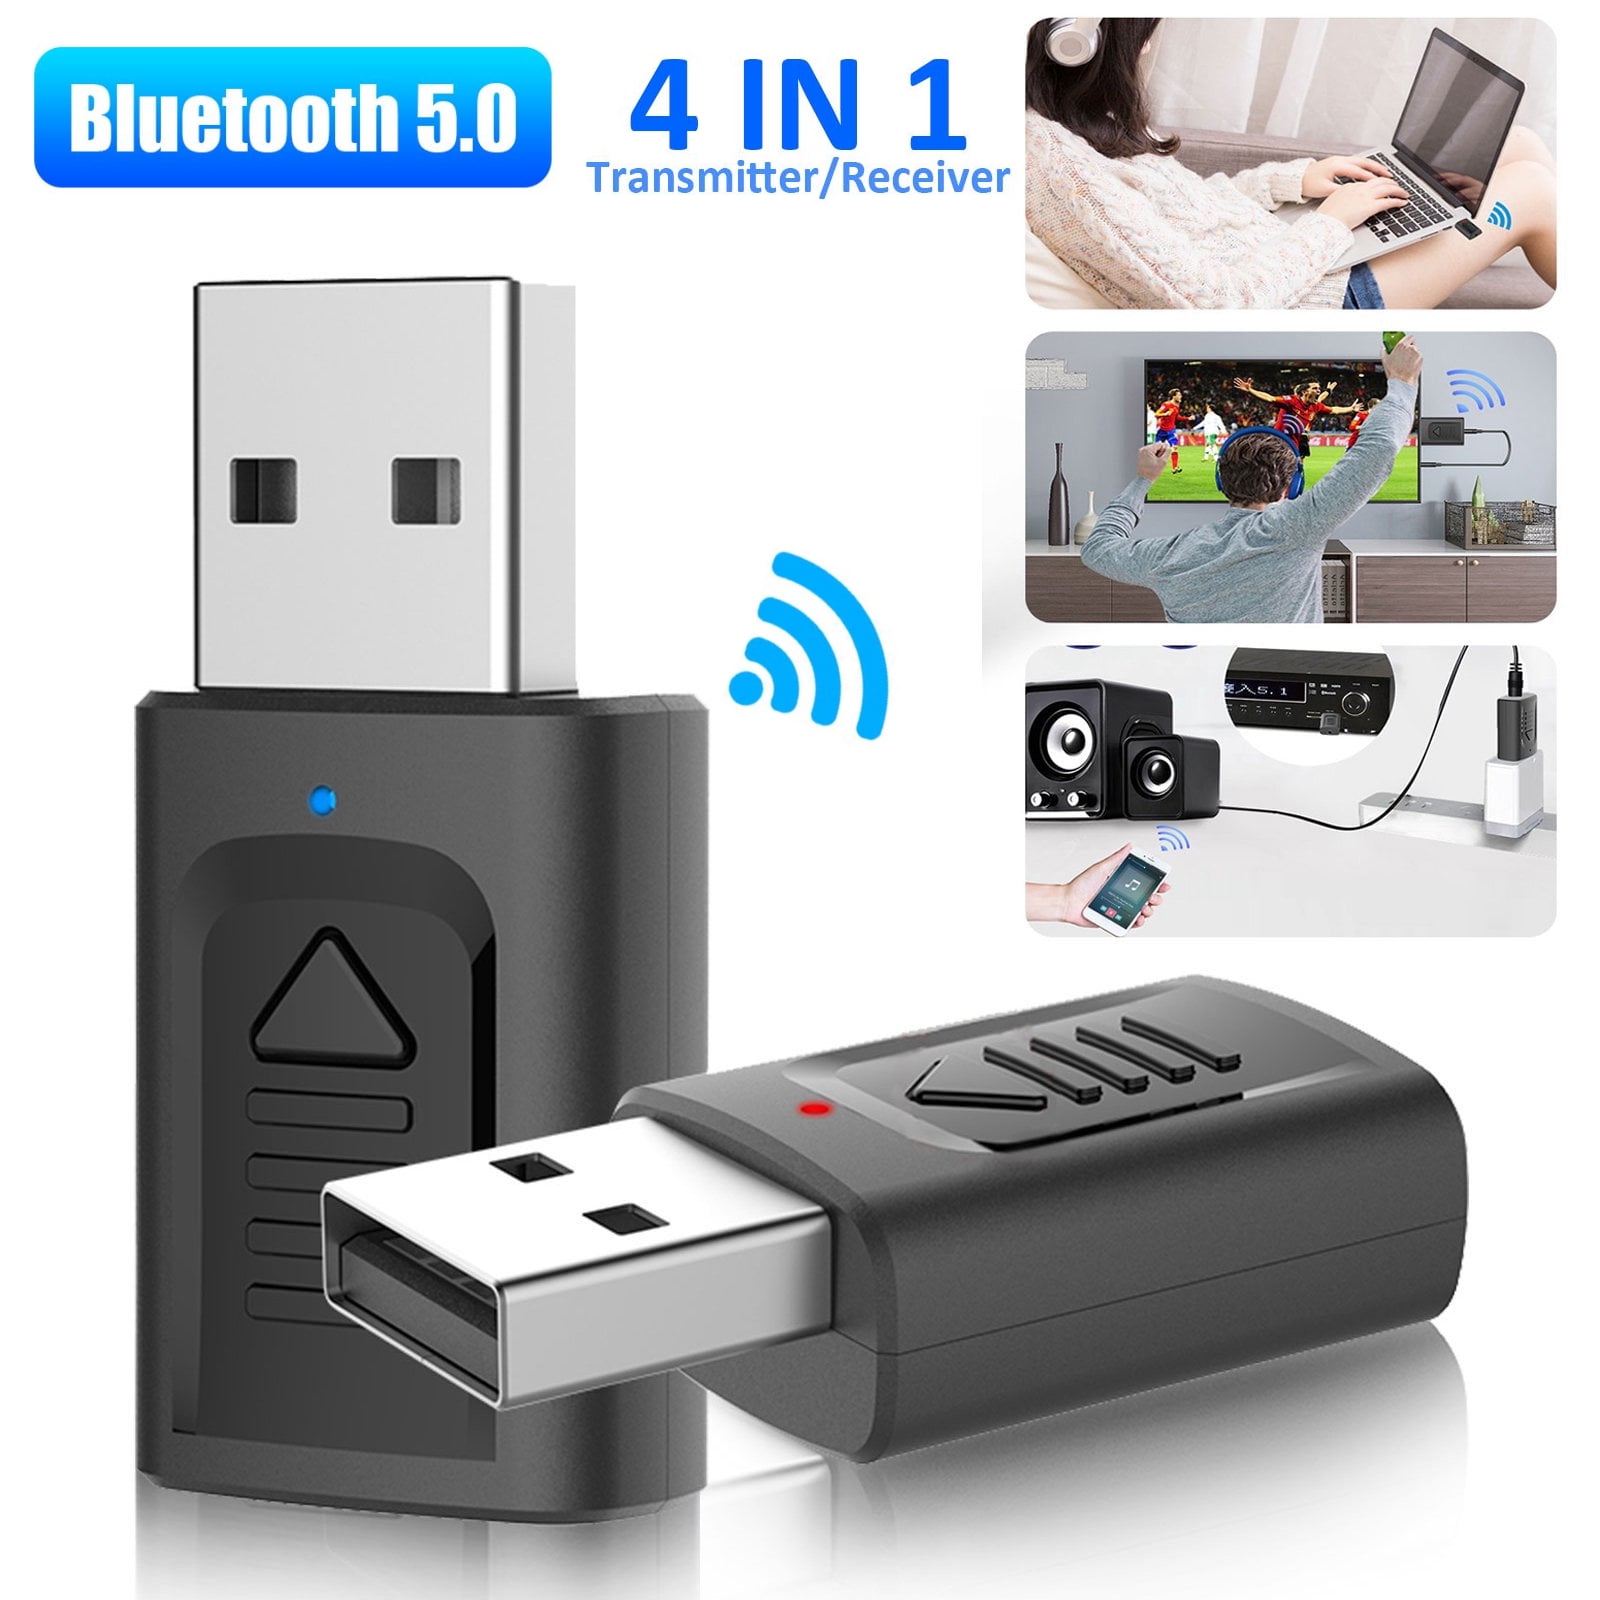 4 in1 USB Bluetooth Dongle 5.0 AUX Audio Transmitter/Receiver Adapter TV Car PC